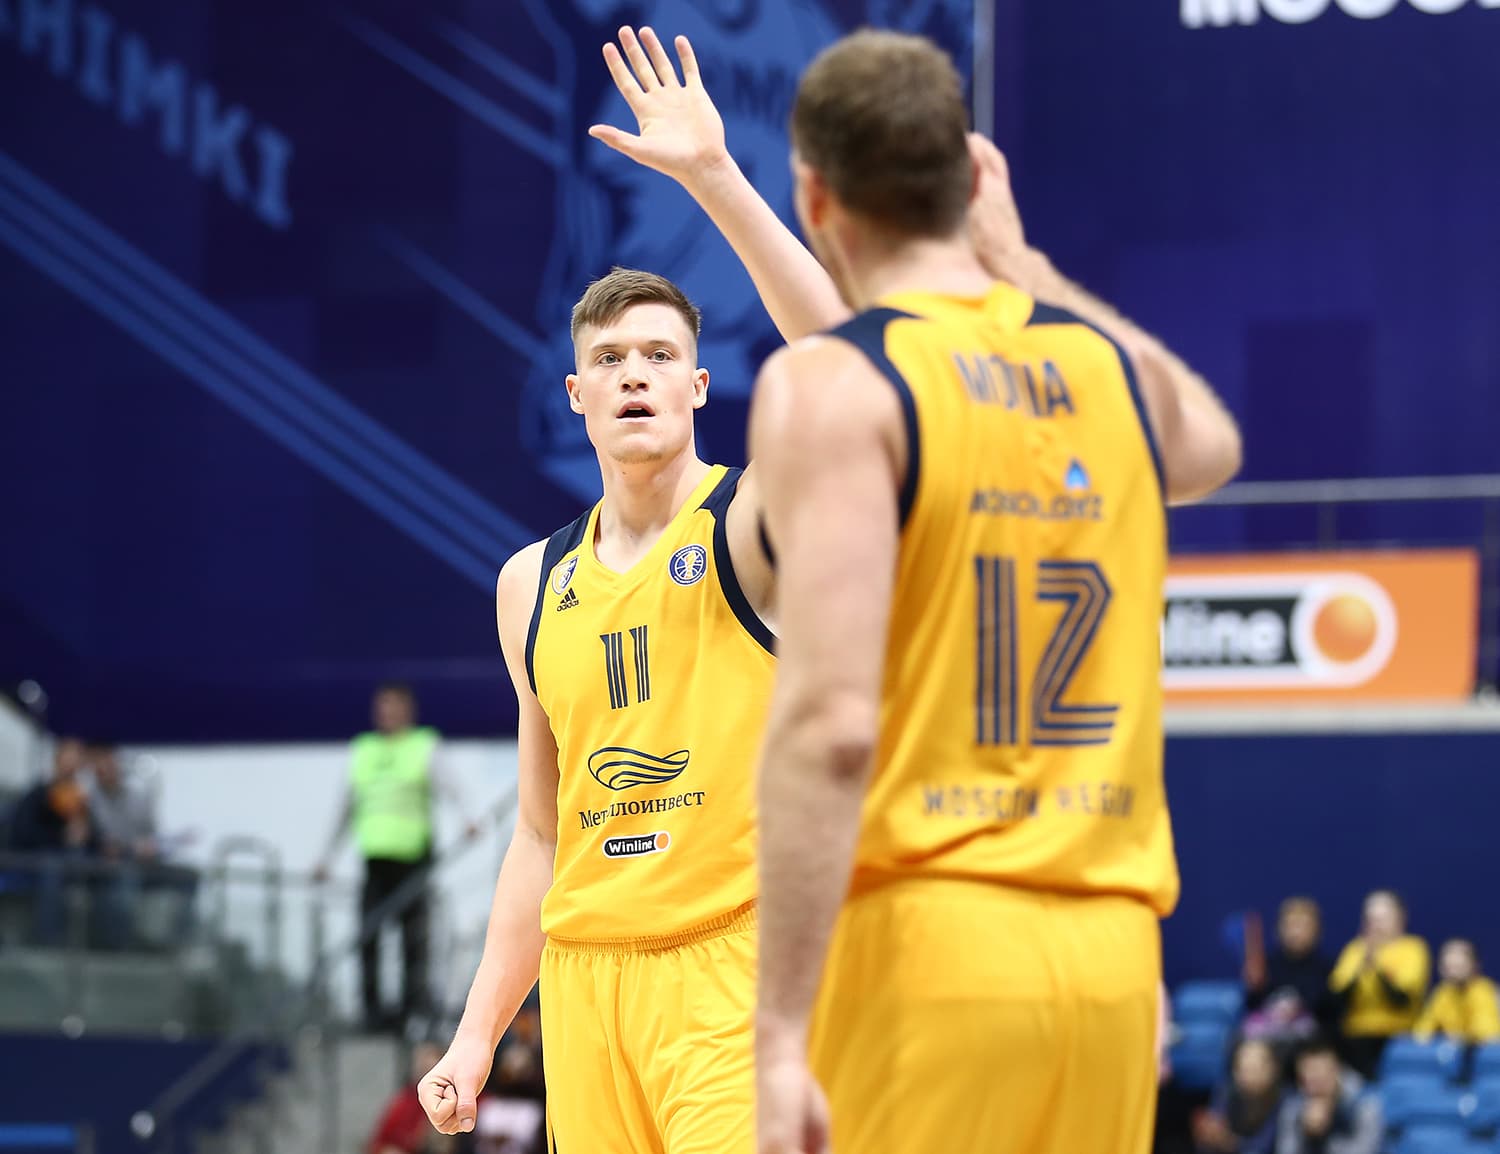 Renfroe’s performance in Kazan, Grigoryev’s career-high game and undefeated Khimki. 9th week in review